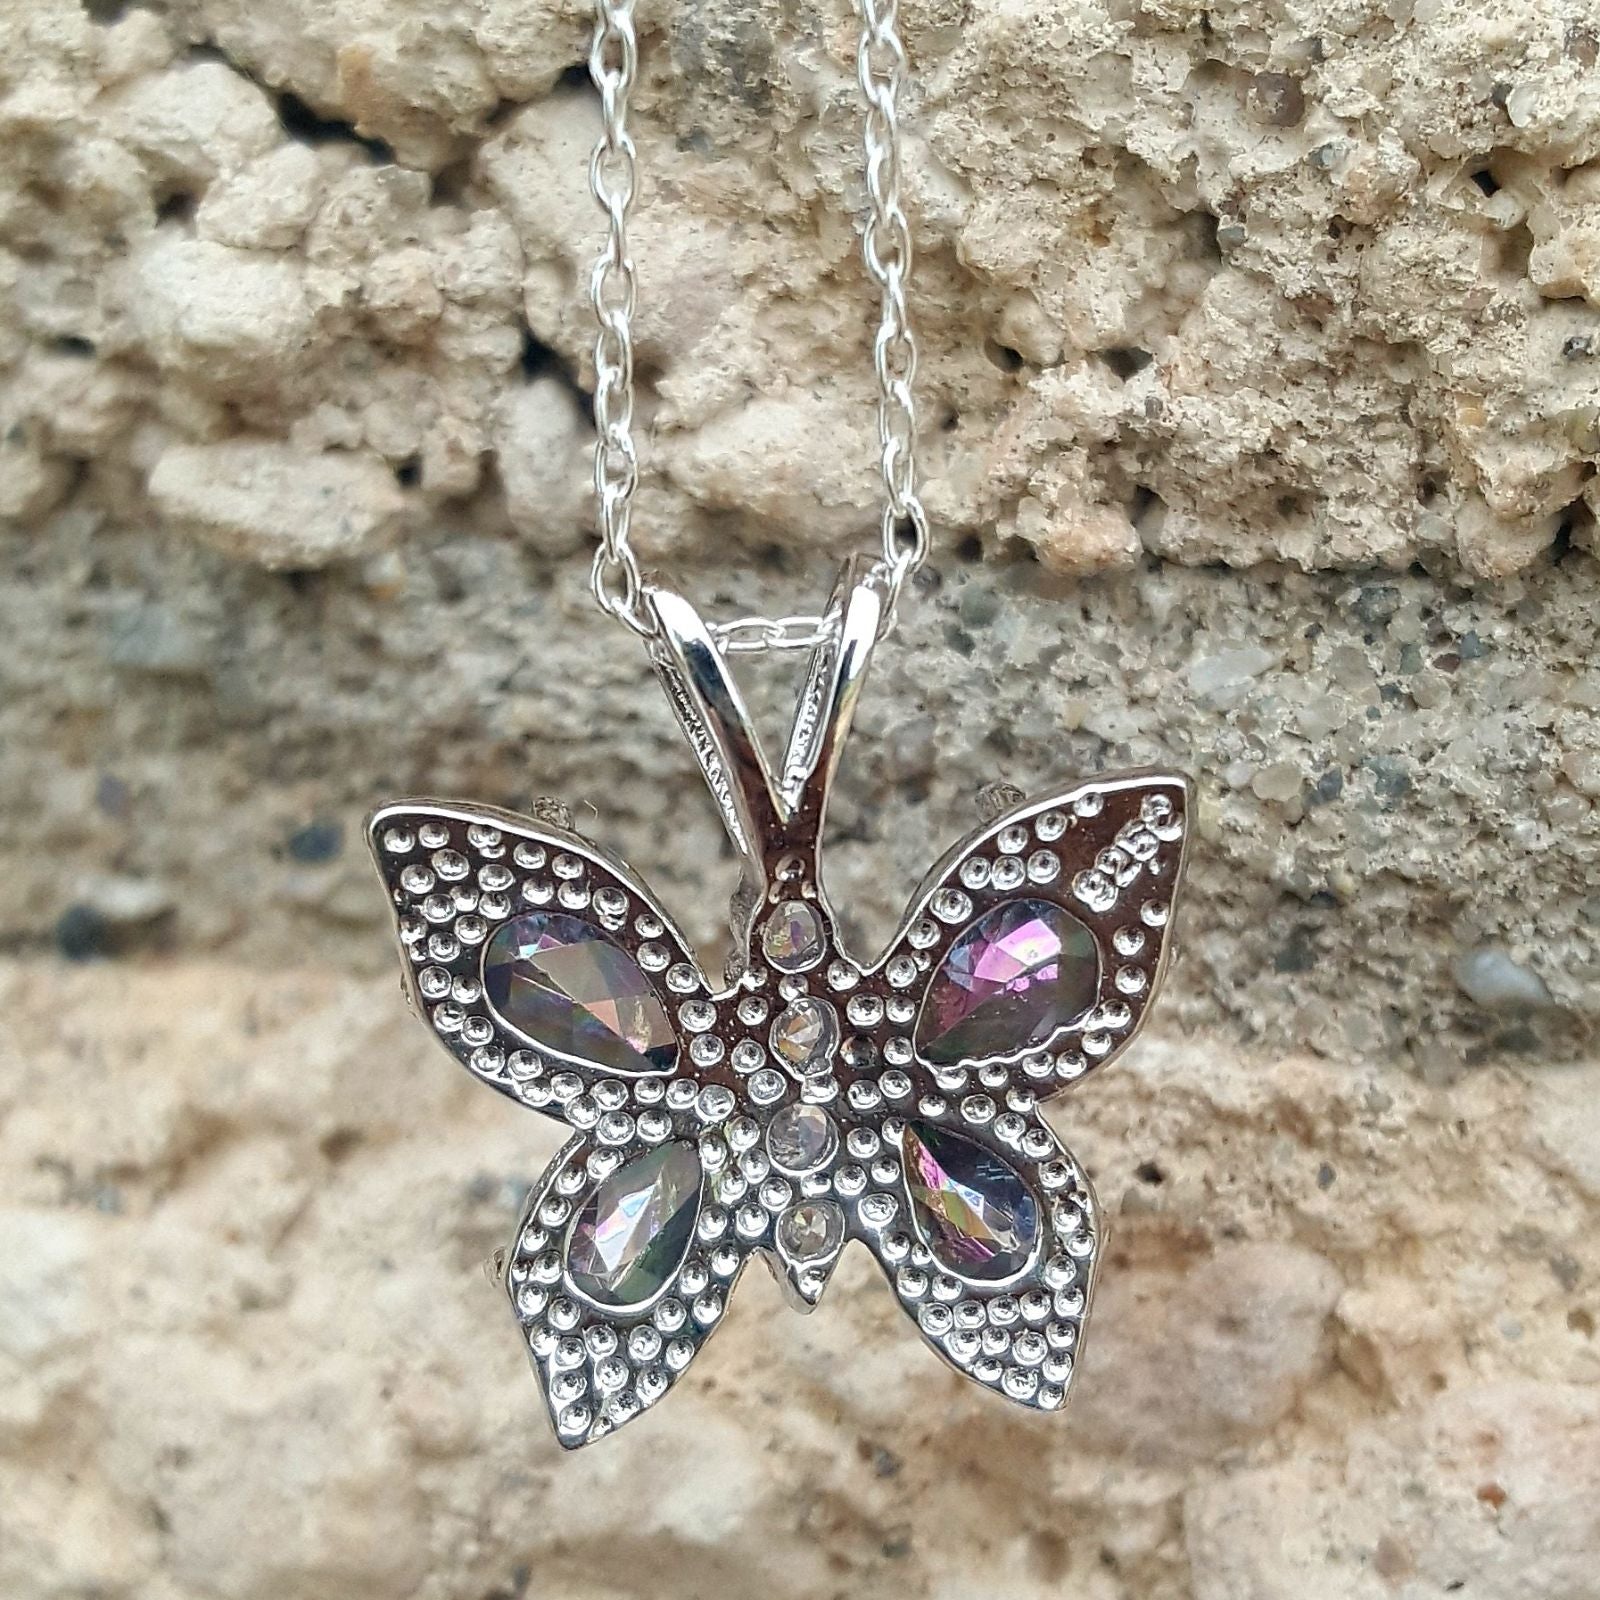 Butterfly Necklace White Opal Necklace Small Butterfly - Etsy | Opal  necklace, Opal butterfly necklace, Fire opal necklace